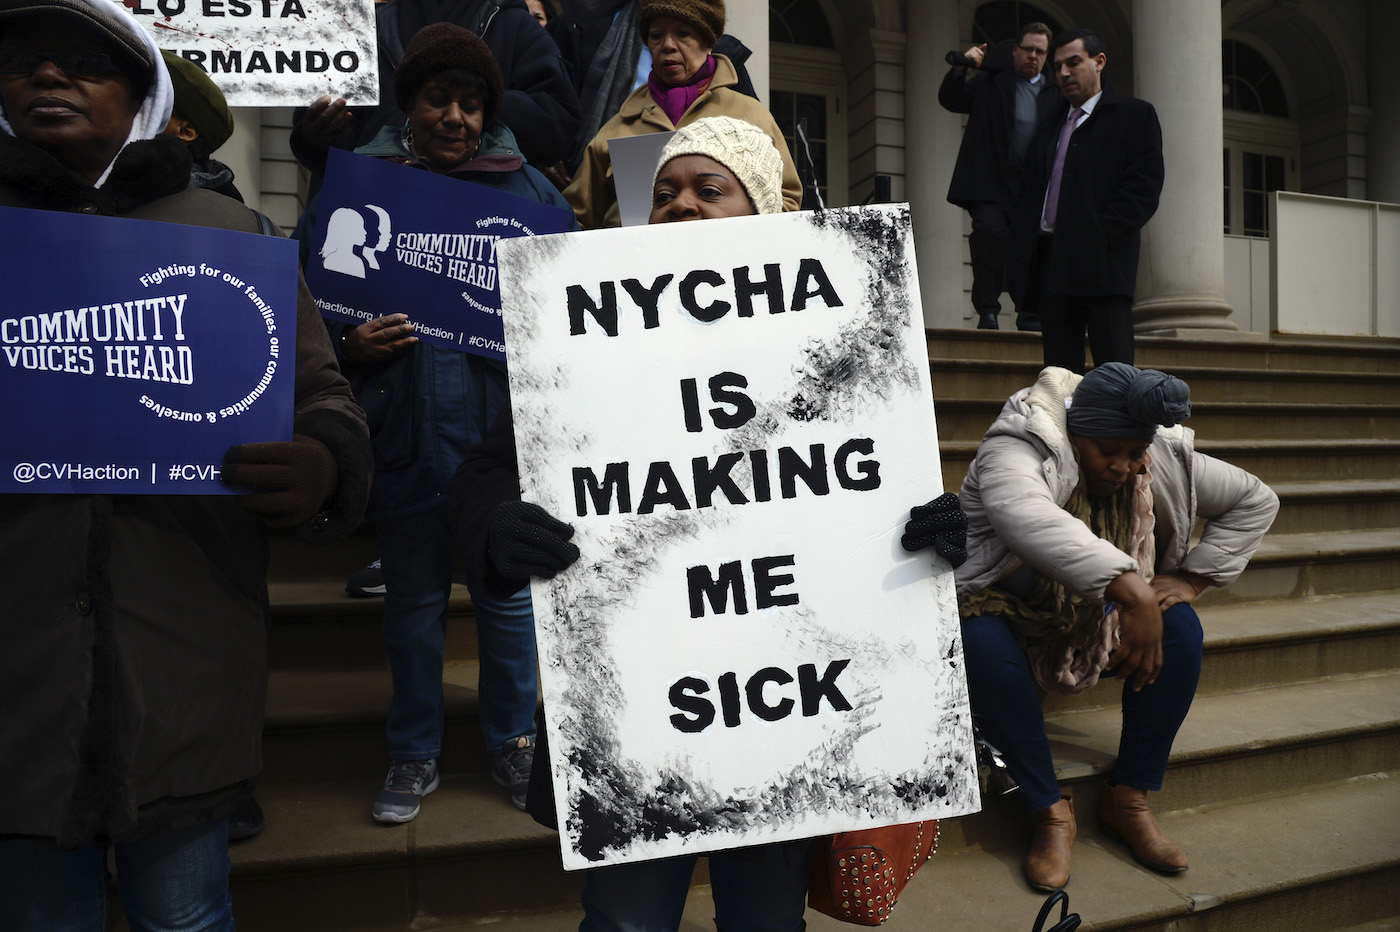 Woman at rally holds sign that says NYCHA is making me sick